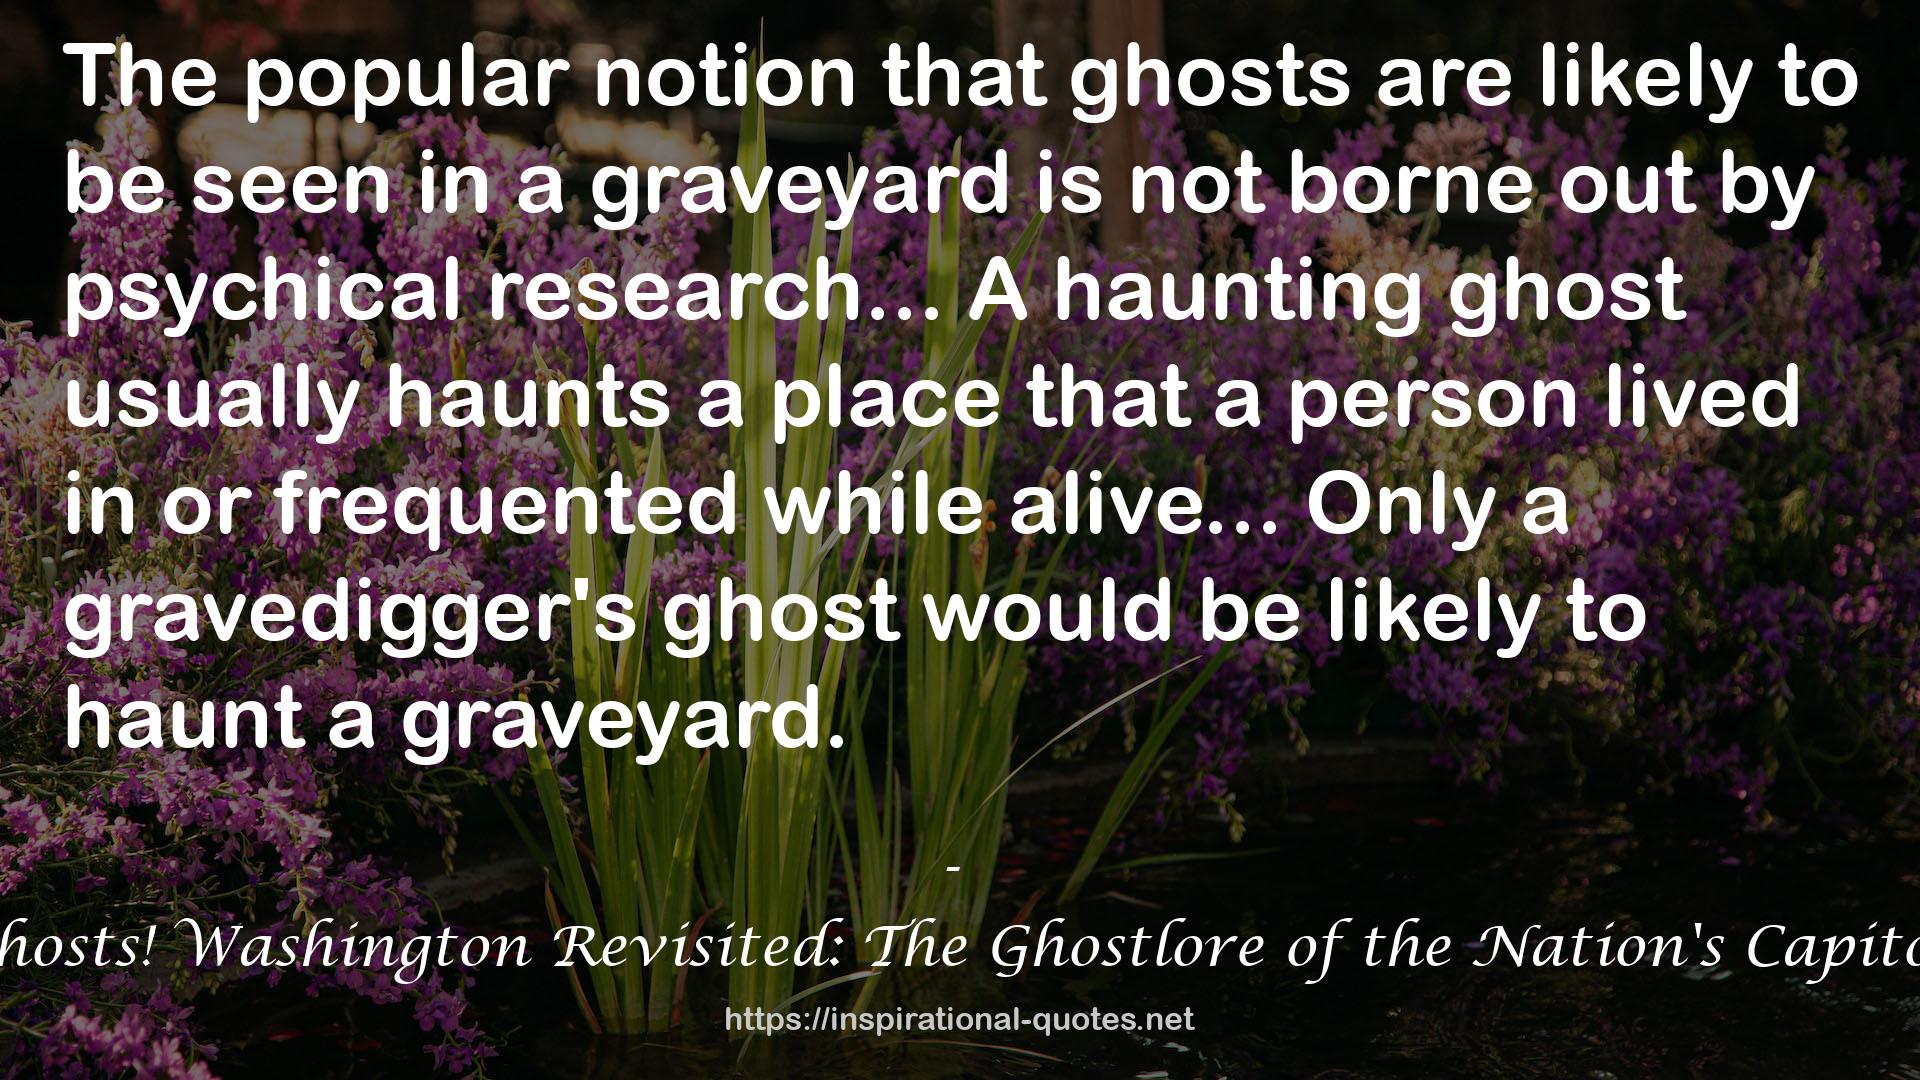 Ghosts! Washington Revisited: The Ghostlore of the Nation's Capitol QUOTES